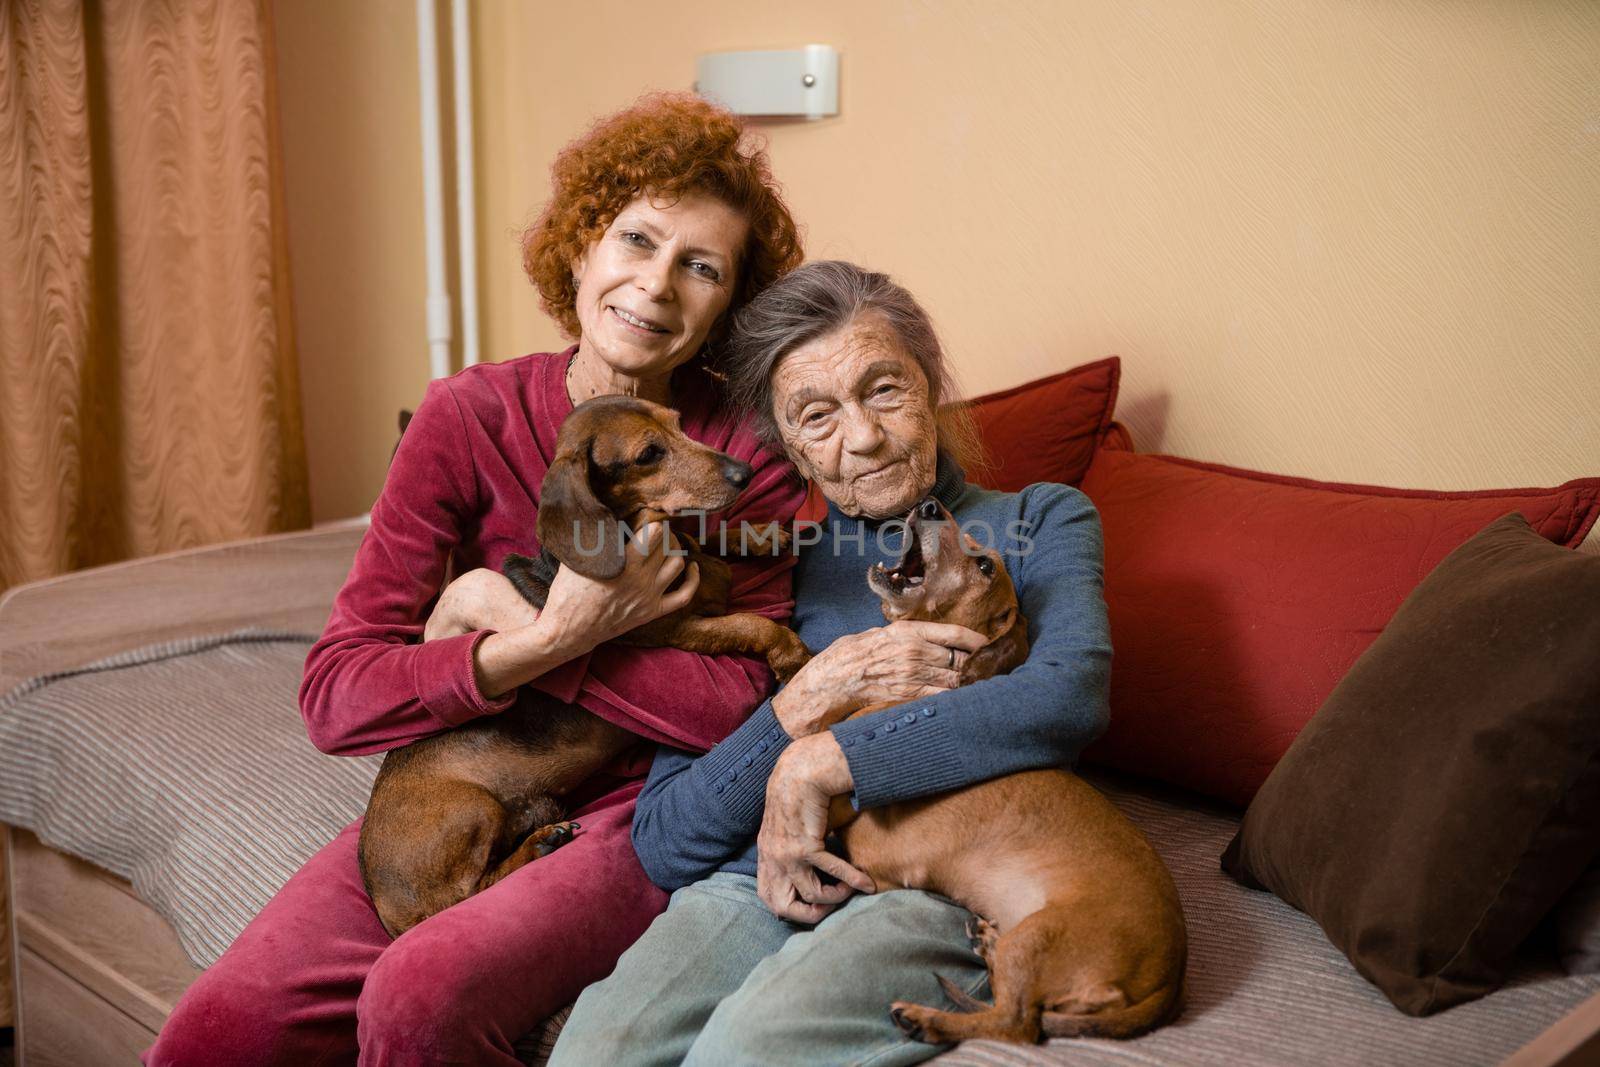 Elder woman and her adult daughter together with two dachshund dogs on sofa indoors spend time happily, portrait. Theme of mother and daughter relationship, taking care of parents, family care by Tomashevska